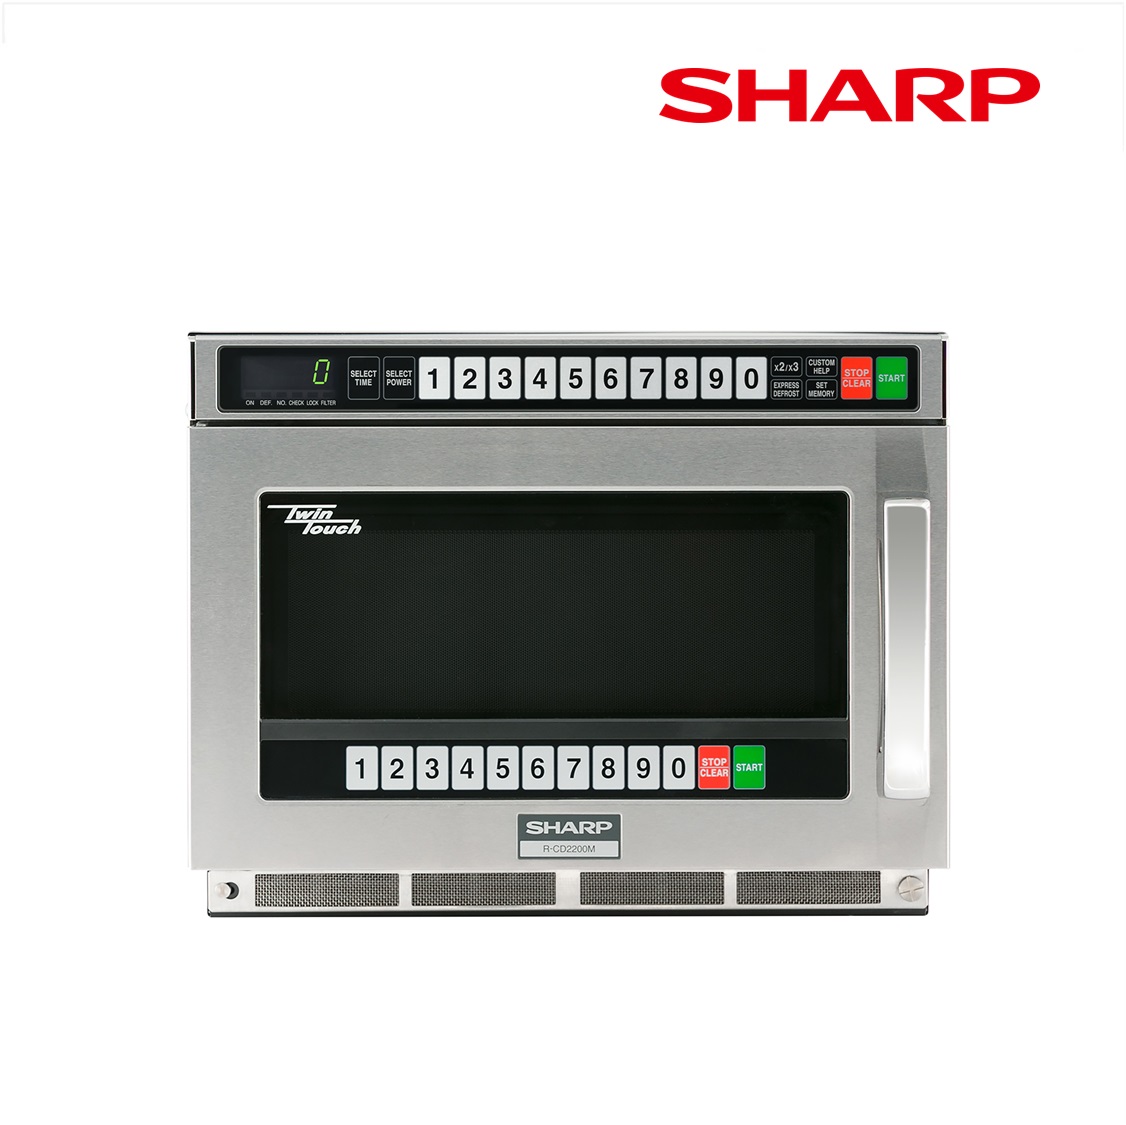 SHARP TwinTouch 2200 Watt Commercial Microwave Oven with Dual TouchPads RCD2200M